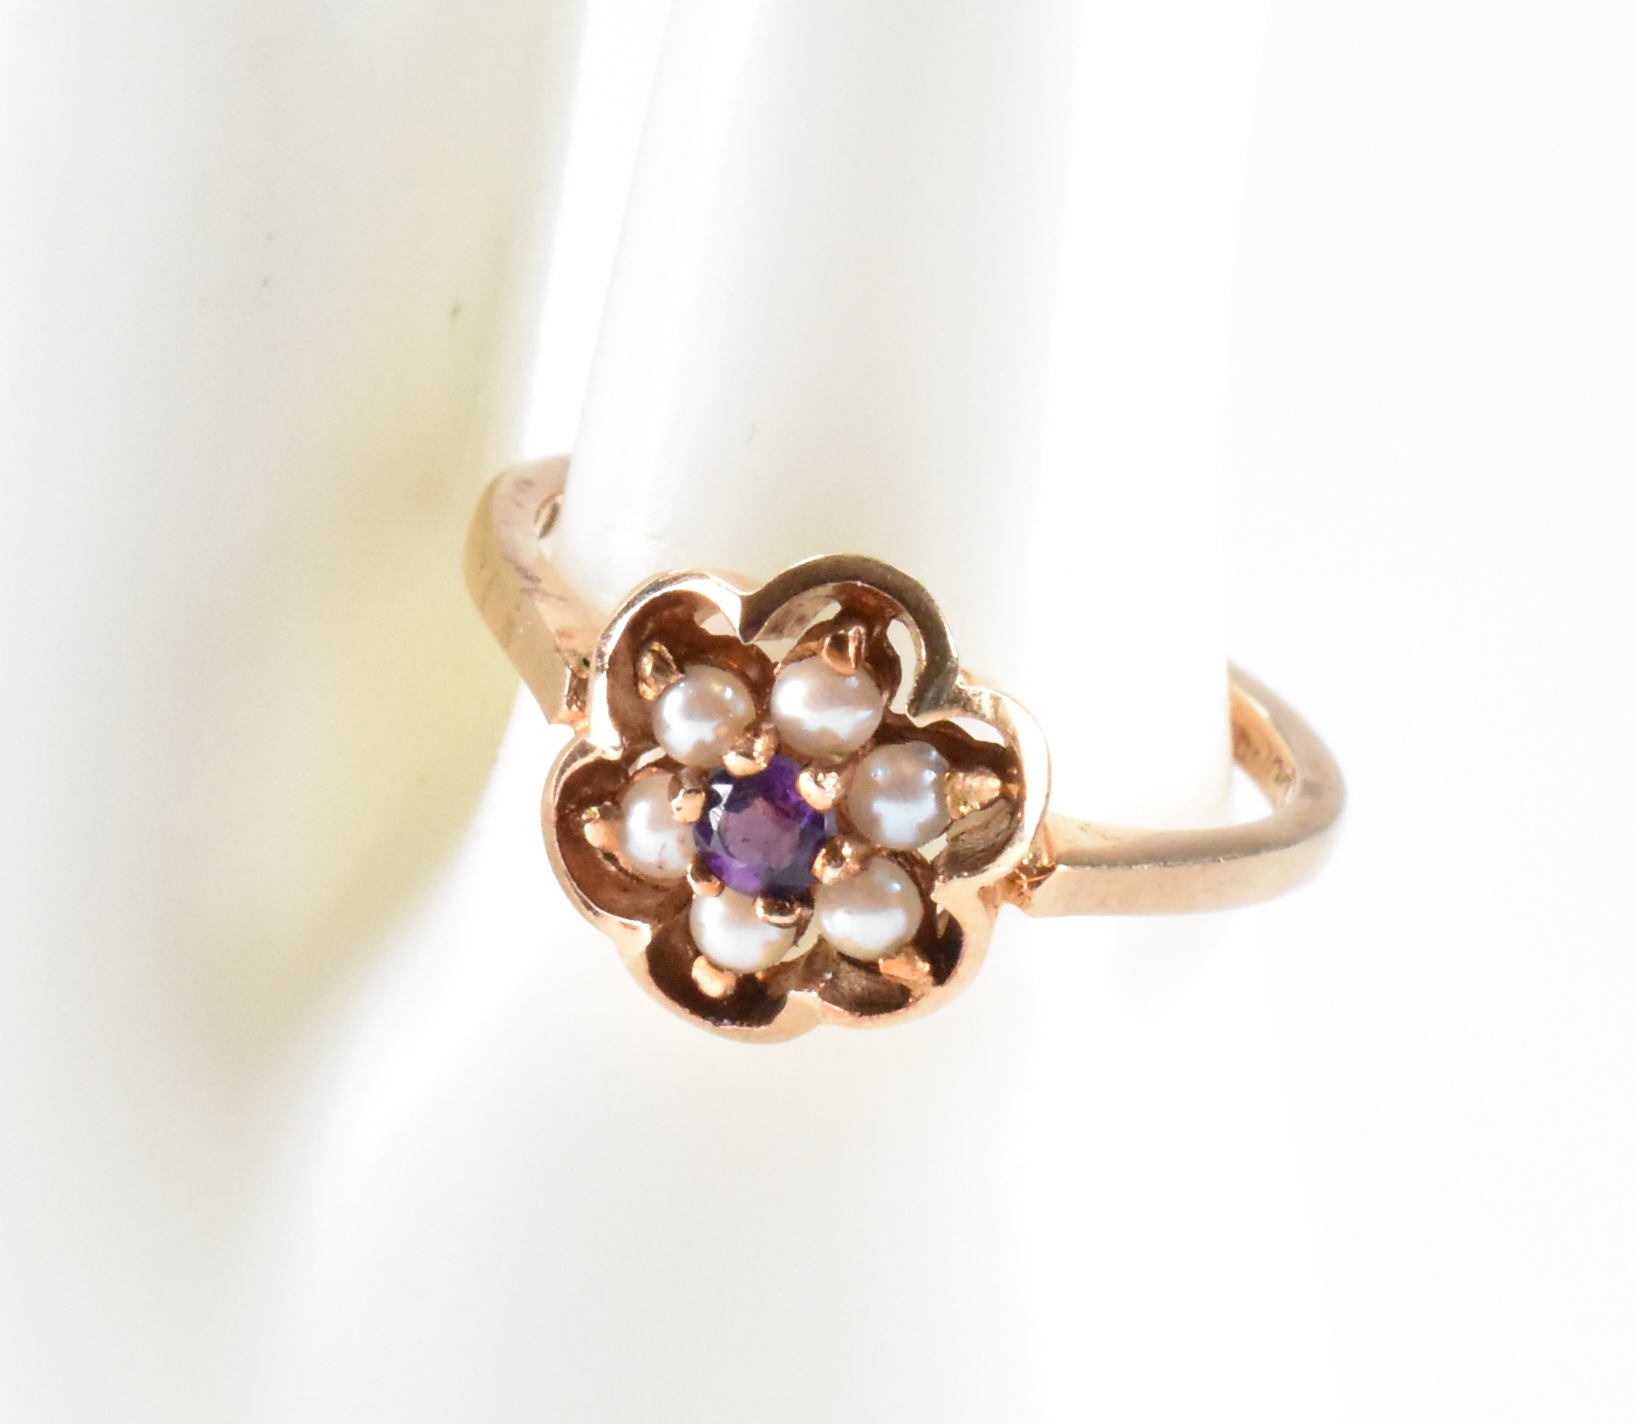 HALLMAKRED 9CT GOLD AMETHYST & SEED PEARL RING - Image 5 of 6